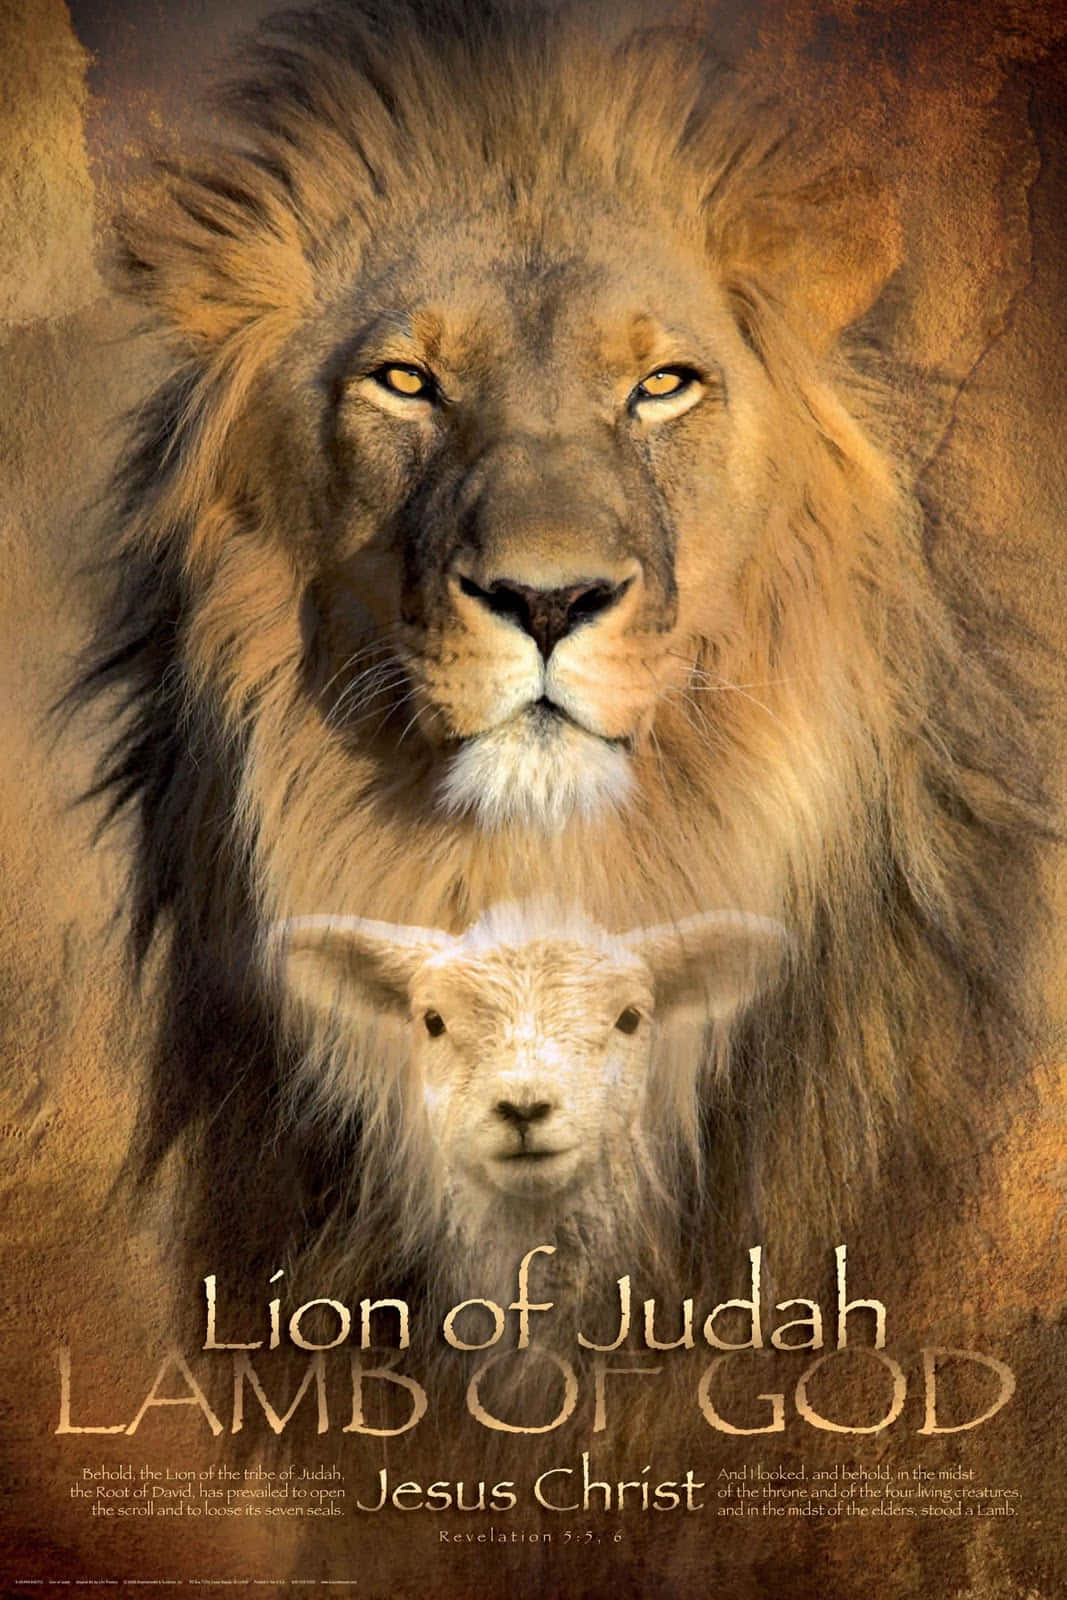 A symbol of power, courage and faith: The Lion Of Judah.